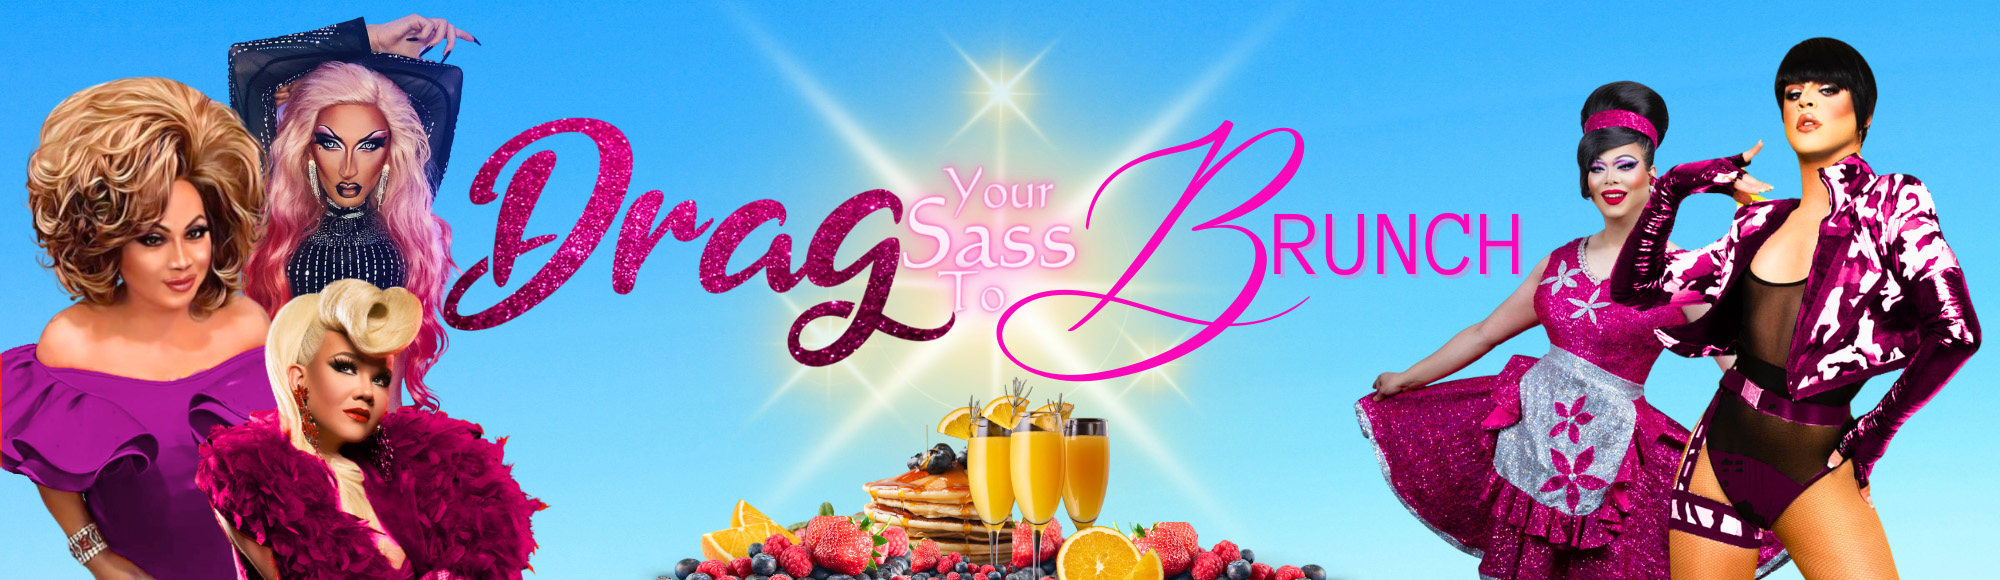 Hamburger Mary's - Drag your Sass to Brunch show